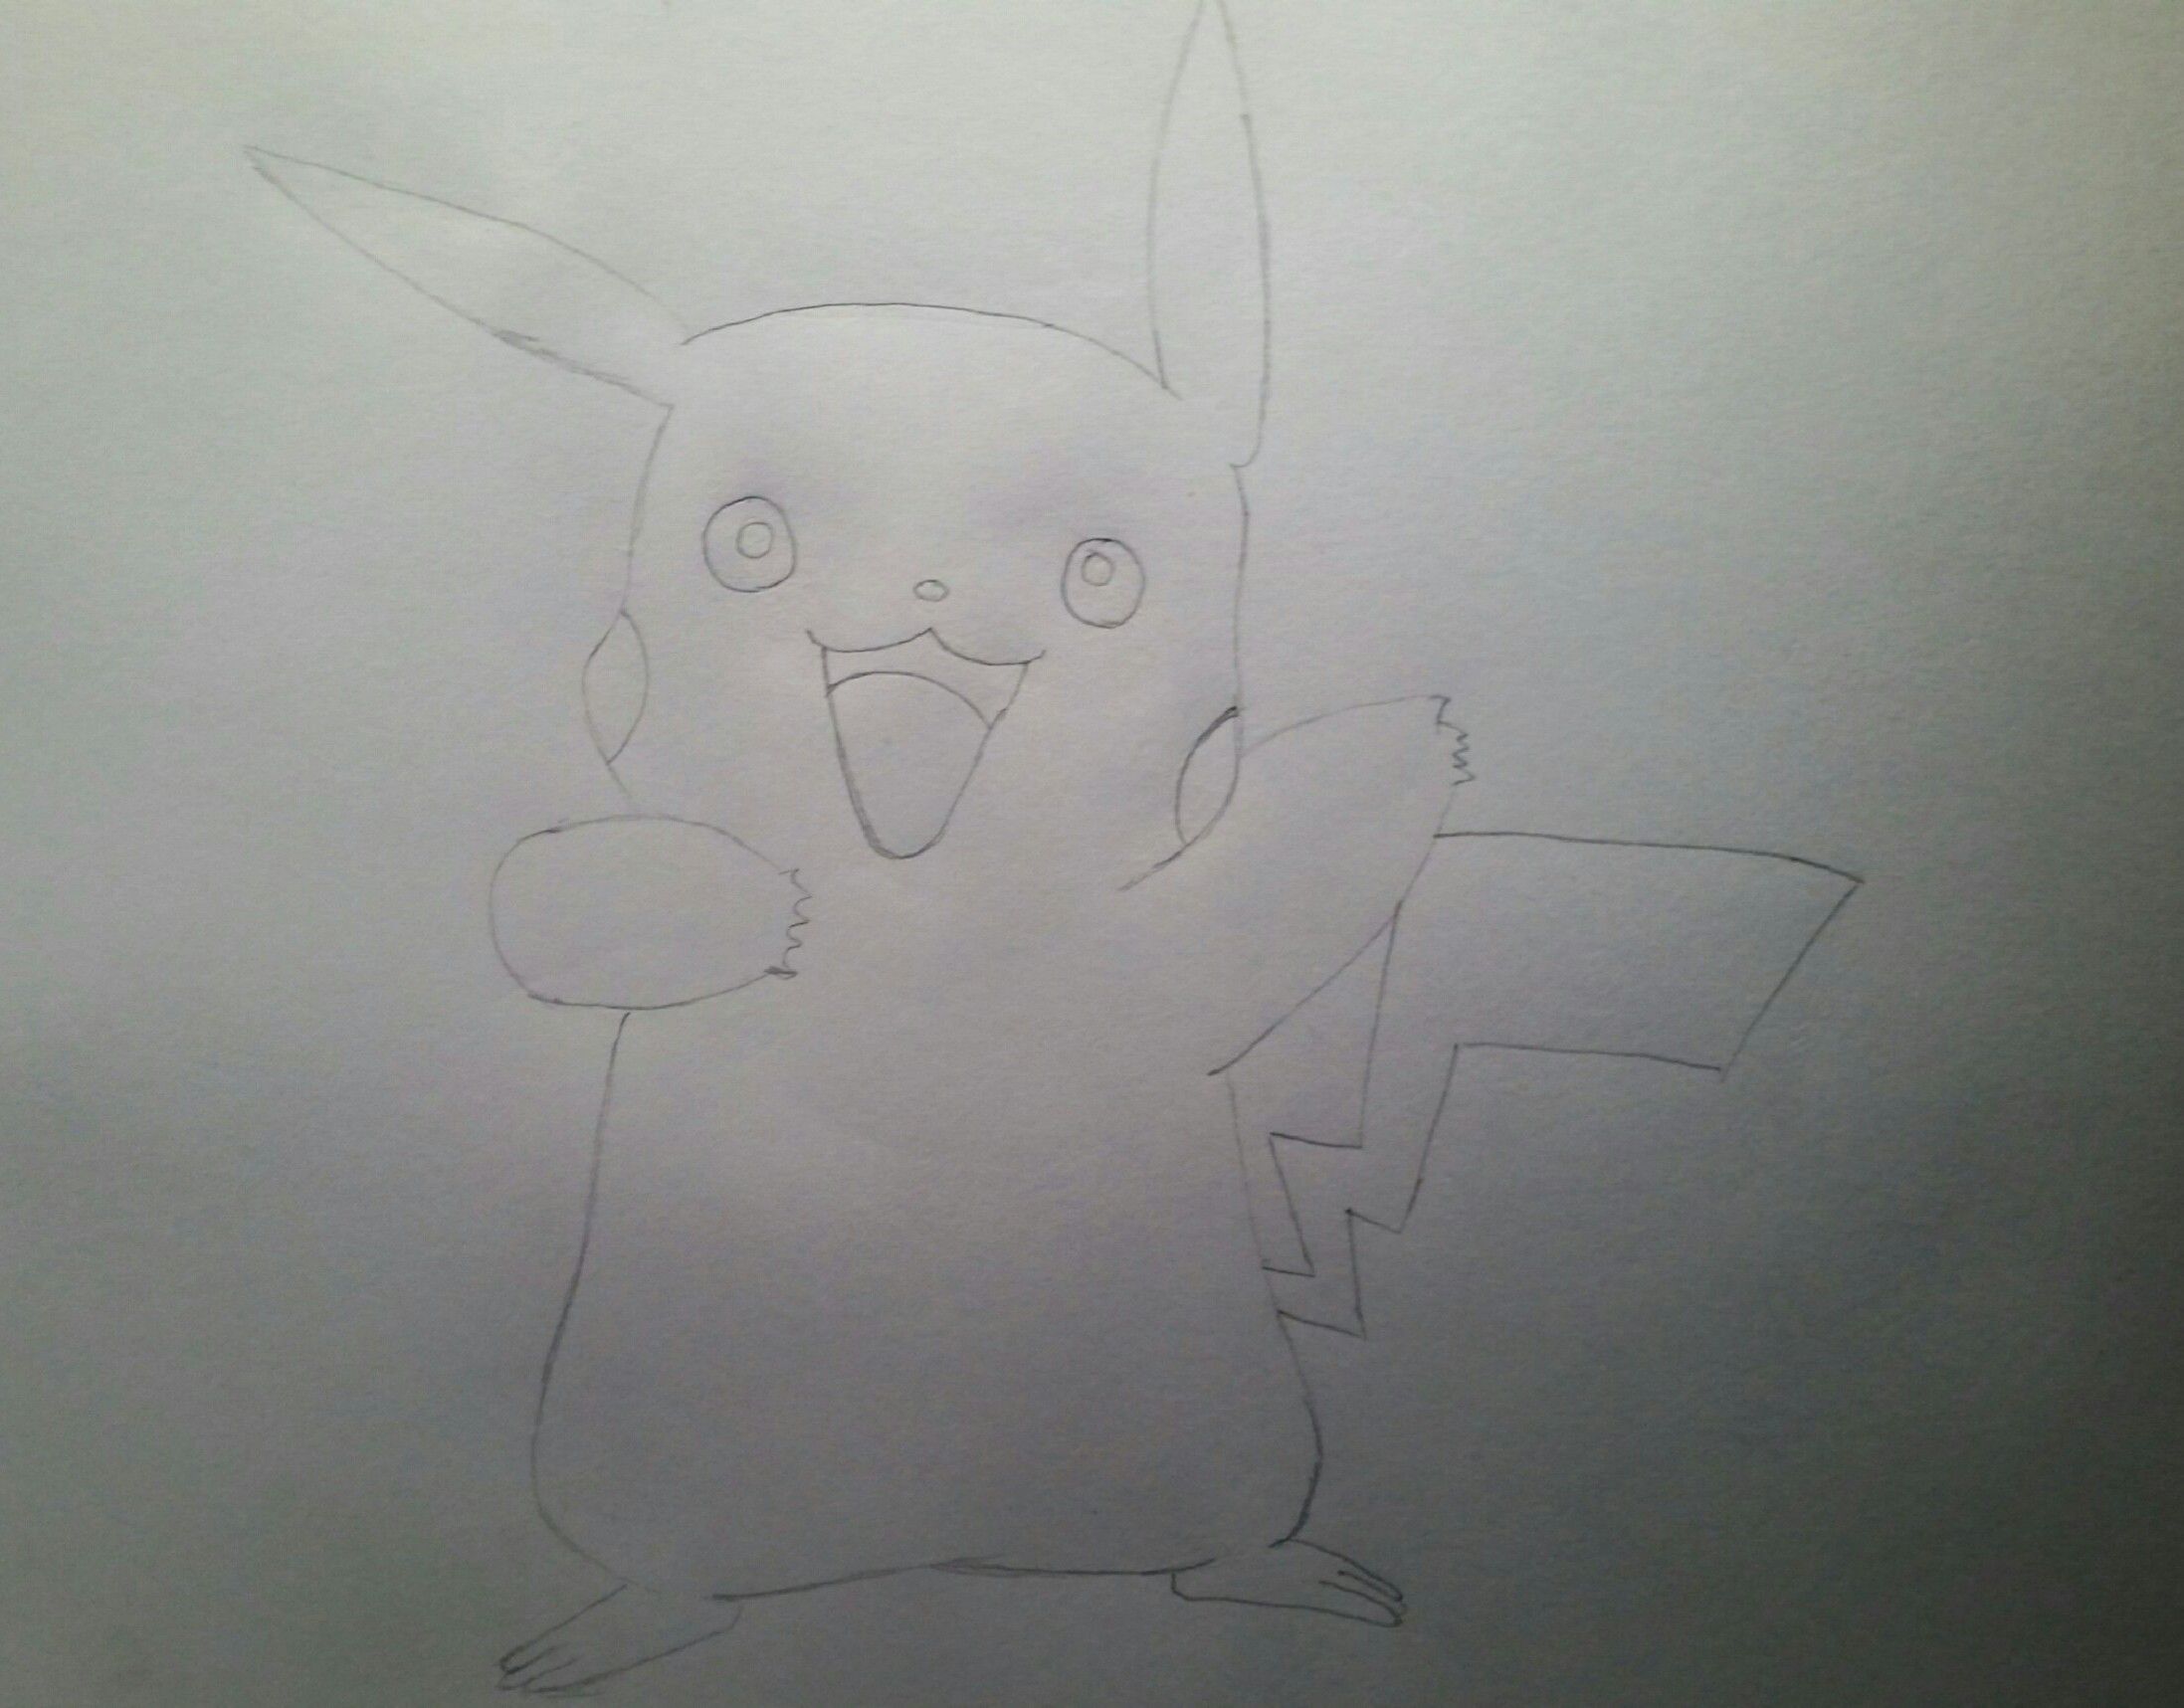 Easy How to Draw Pikachu Tutorial and Pikachu Coloring Page